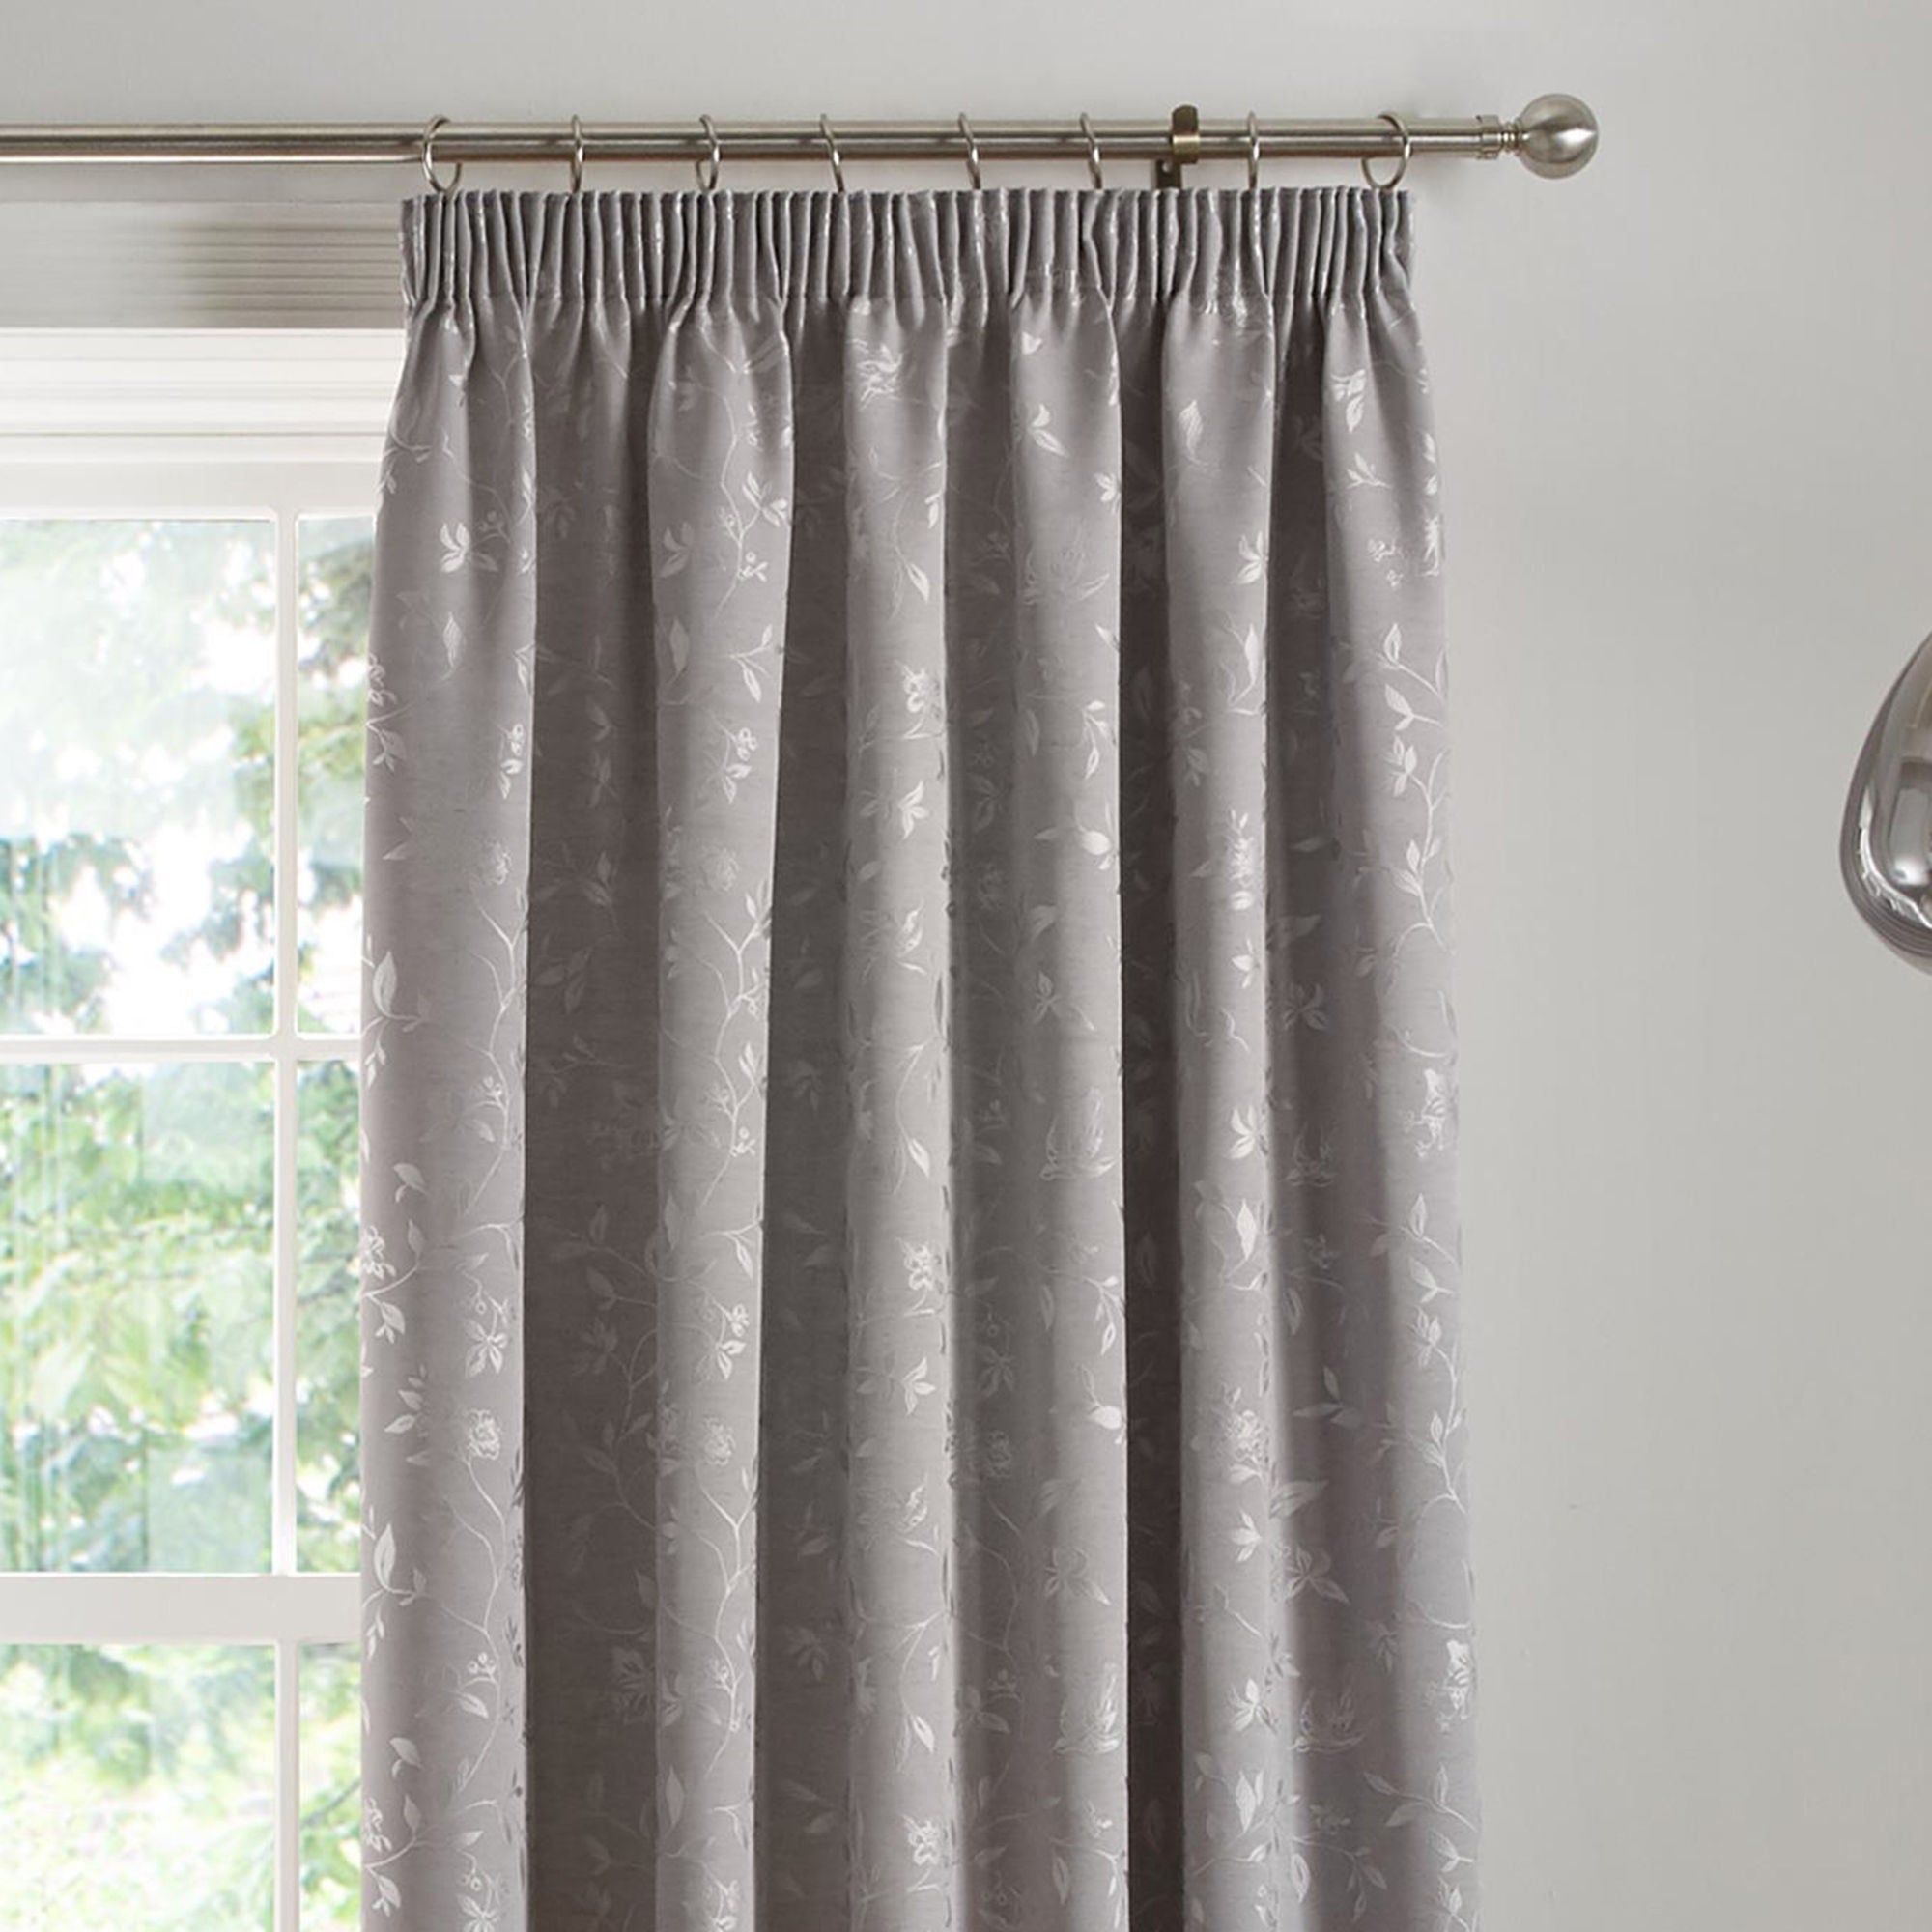 Bird Trail Pair of Pencil Pleat Curtains by Curtina in Grey - Pair of Pencil Pleat Curtains - Curtina